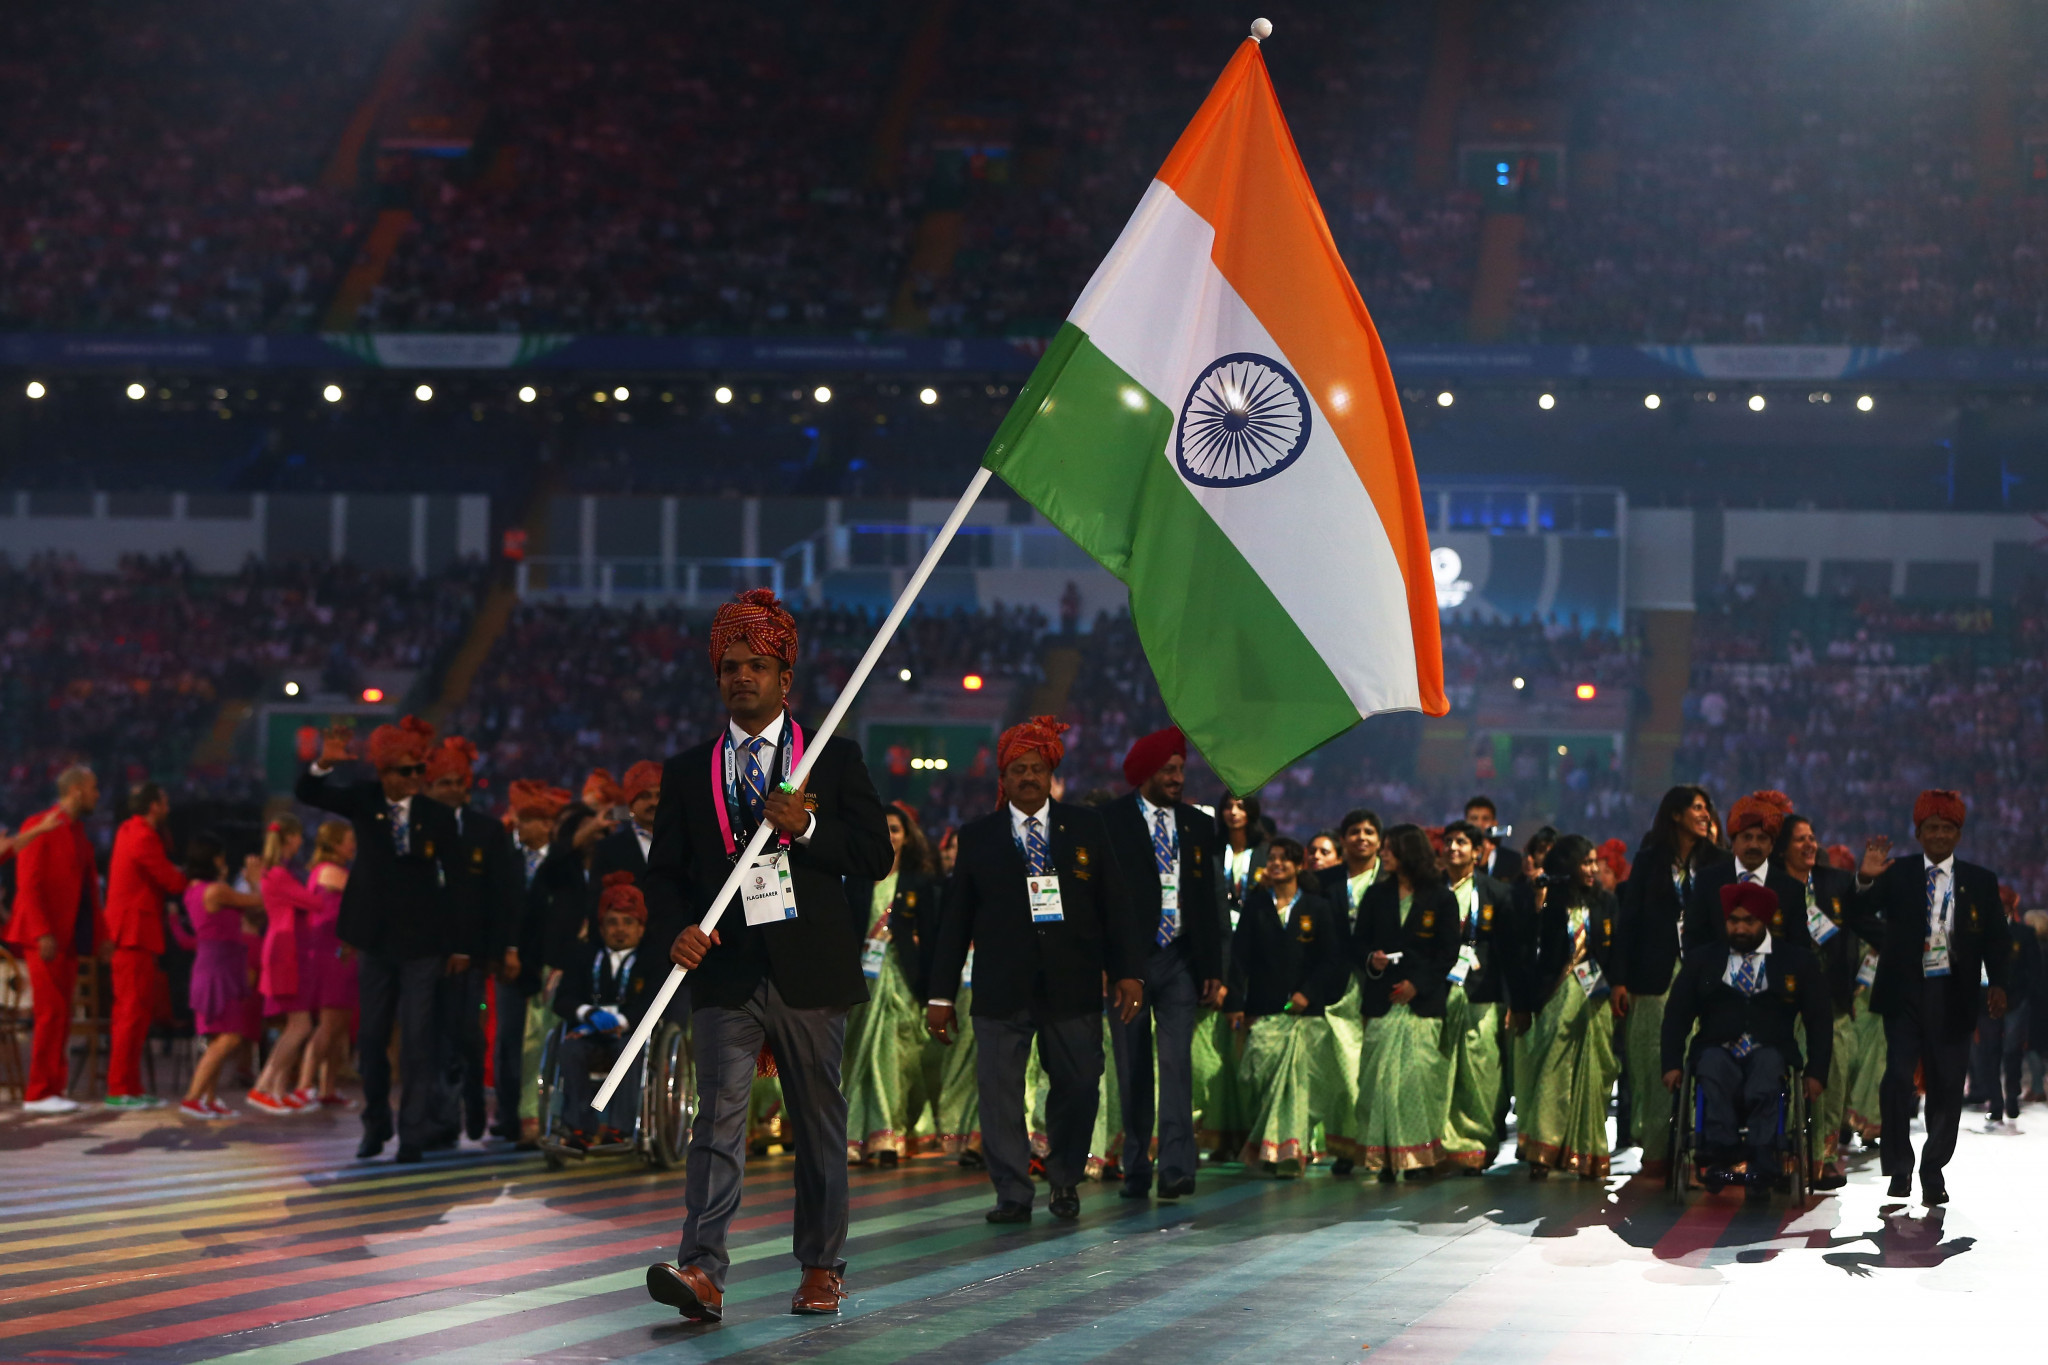 Olympic shooting silver medallist Vijay Kumar carried the Indian flag at the Glasgow 2014 Opening Ceremony ©Getty Images